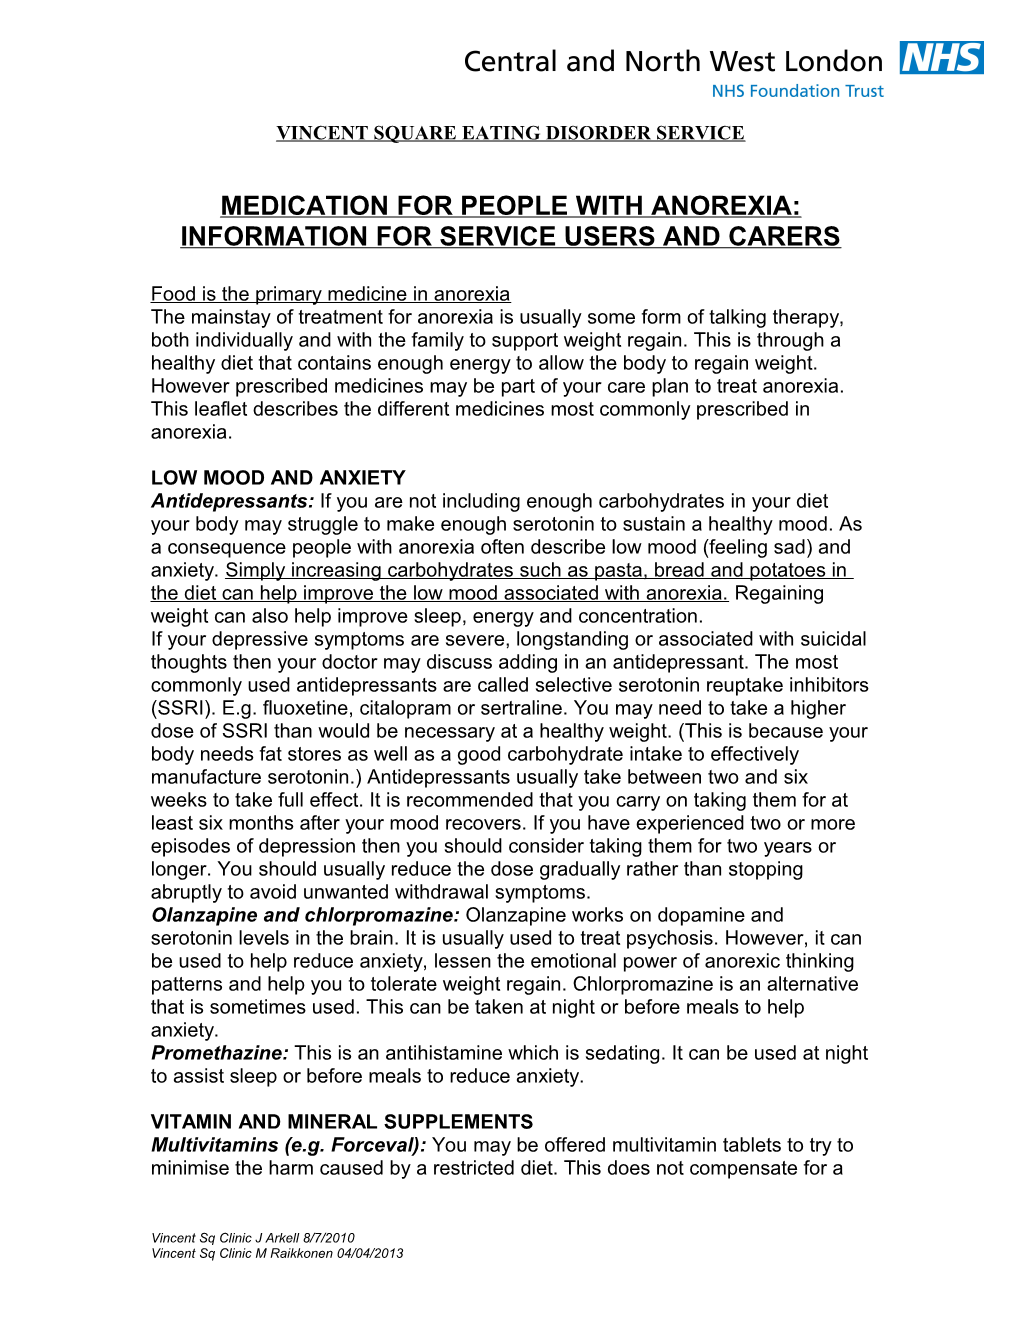 Medication Prescribed for People with Anorexia Nervosa: Information for Service Users and Carers